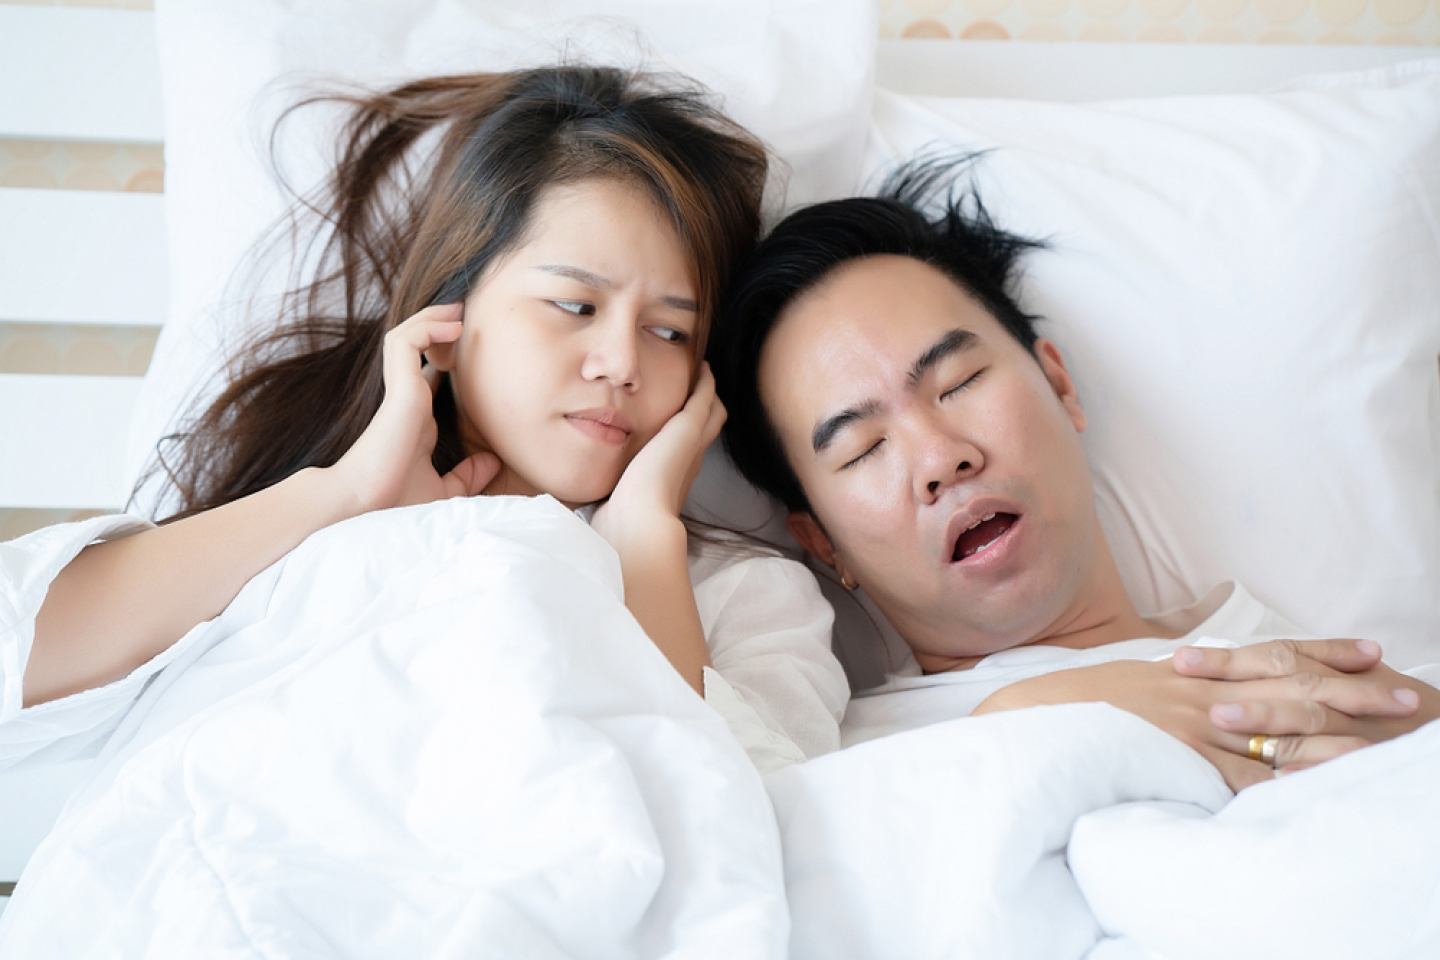 Couple on bed with white mattress Man snoring loud makes women feel annoyed.